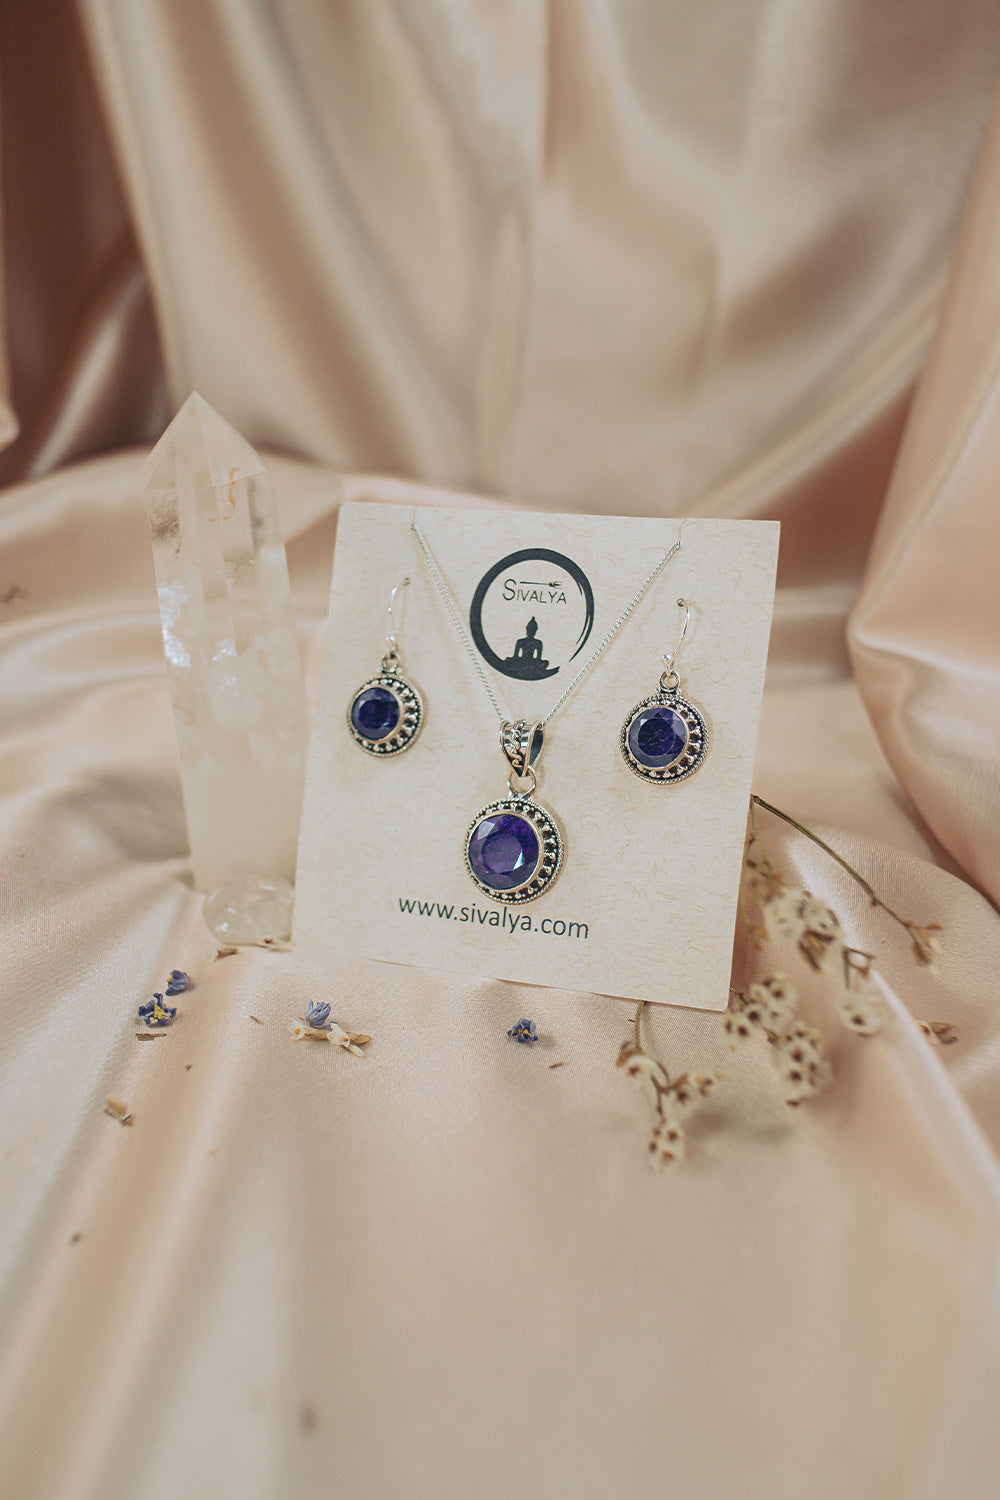 Sivalya Raw Sapphire Silver Necklace and Earrings Jewelry Set  - Aurora